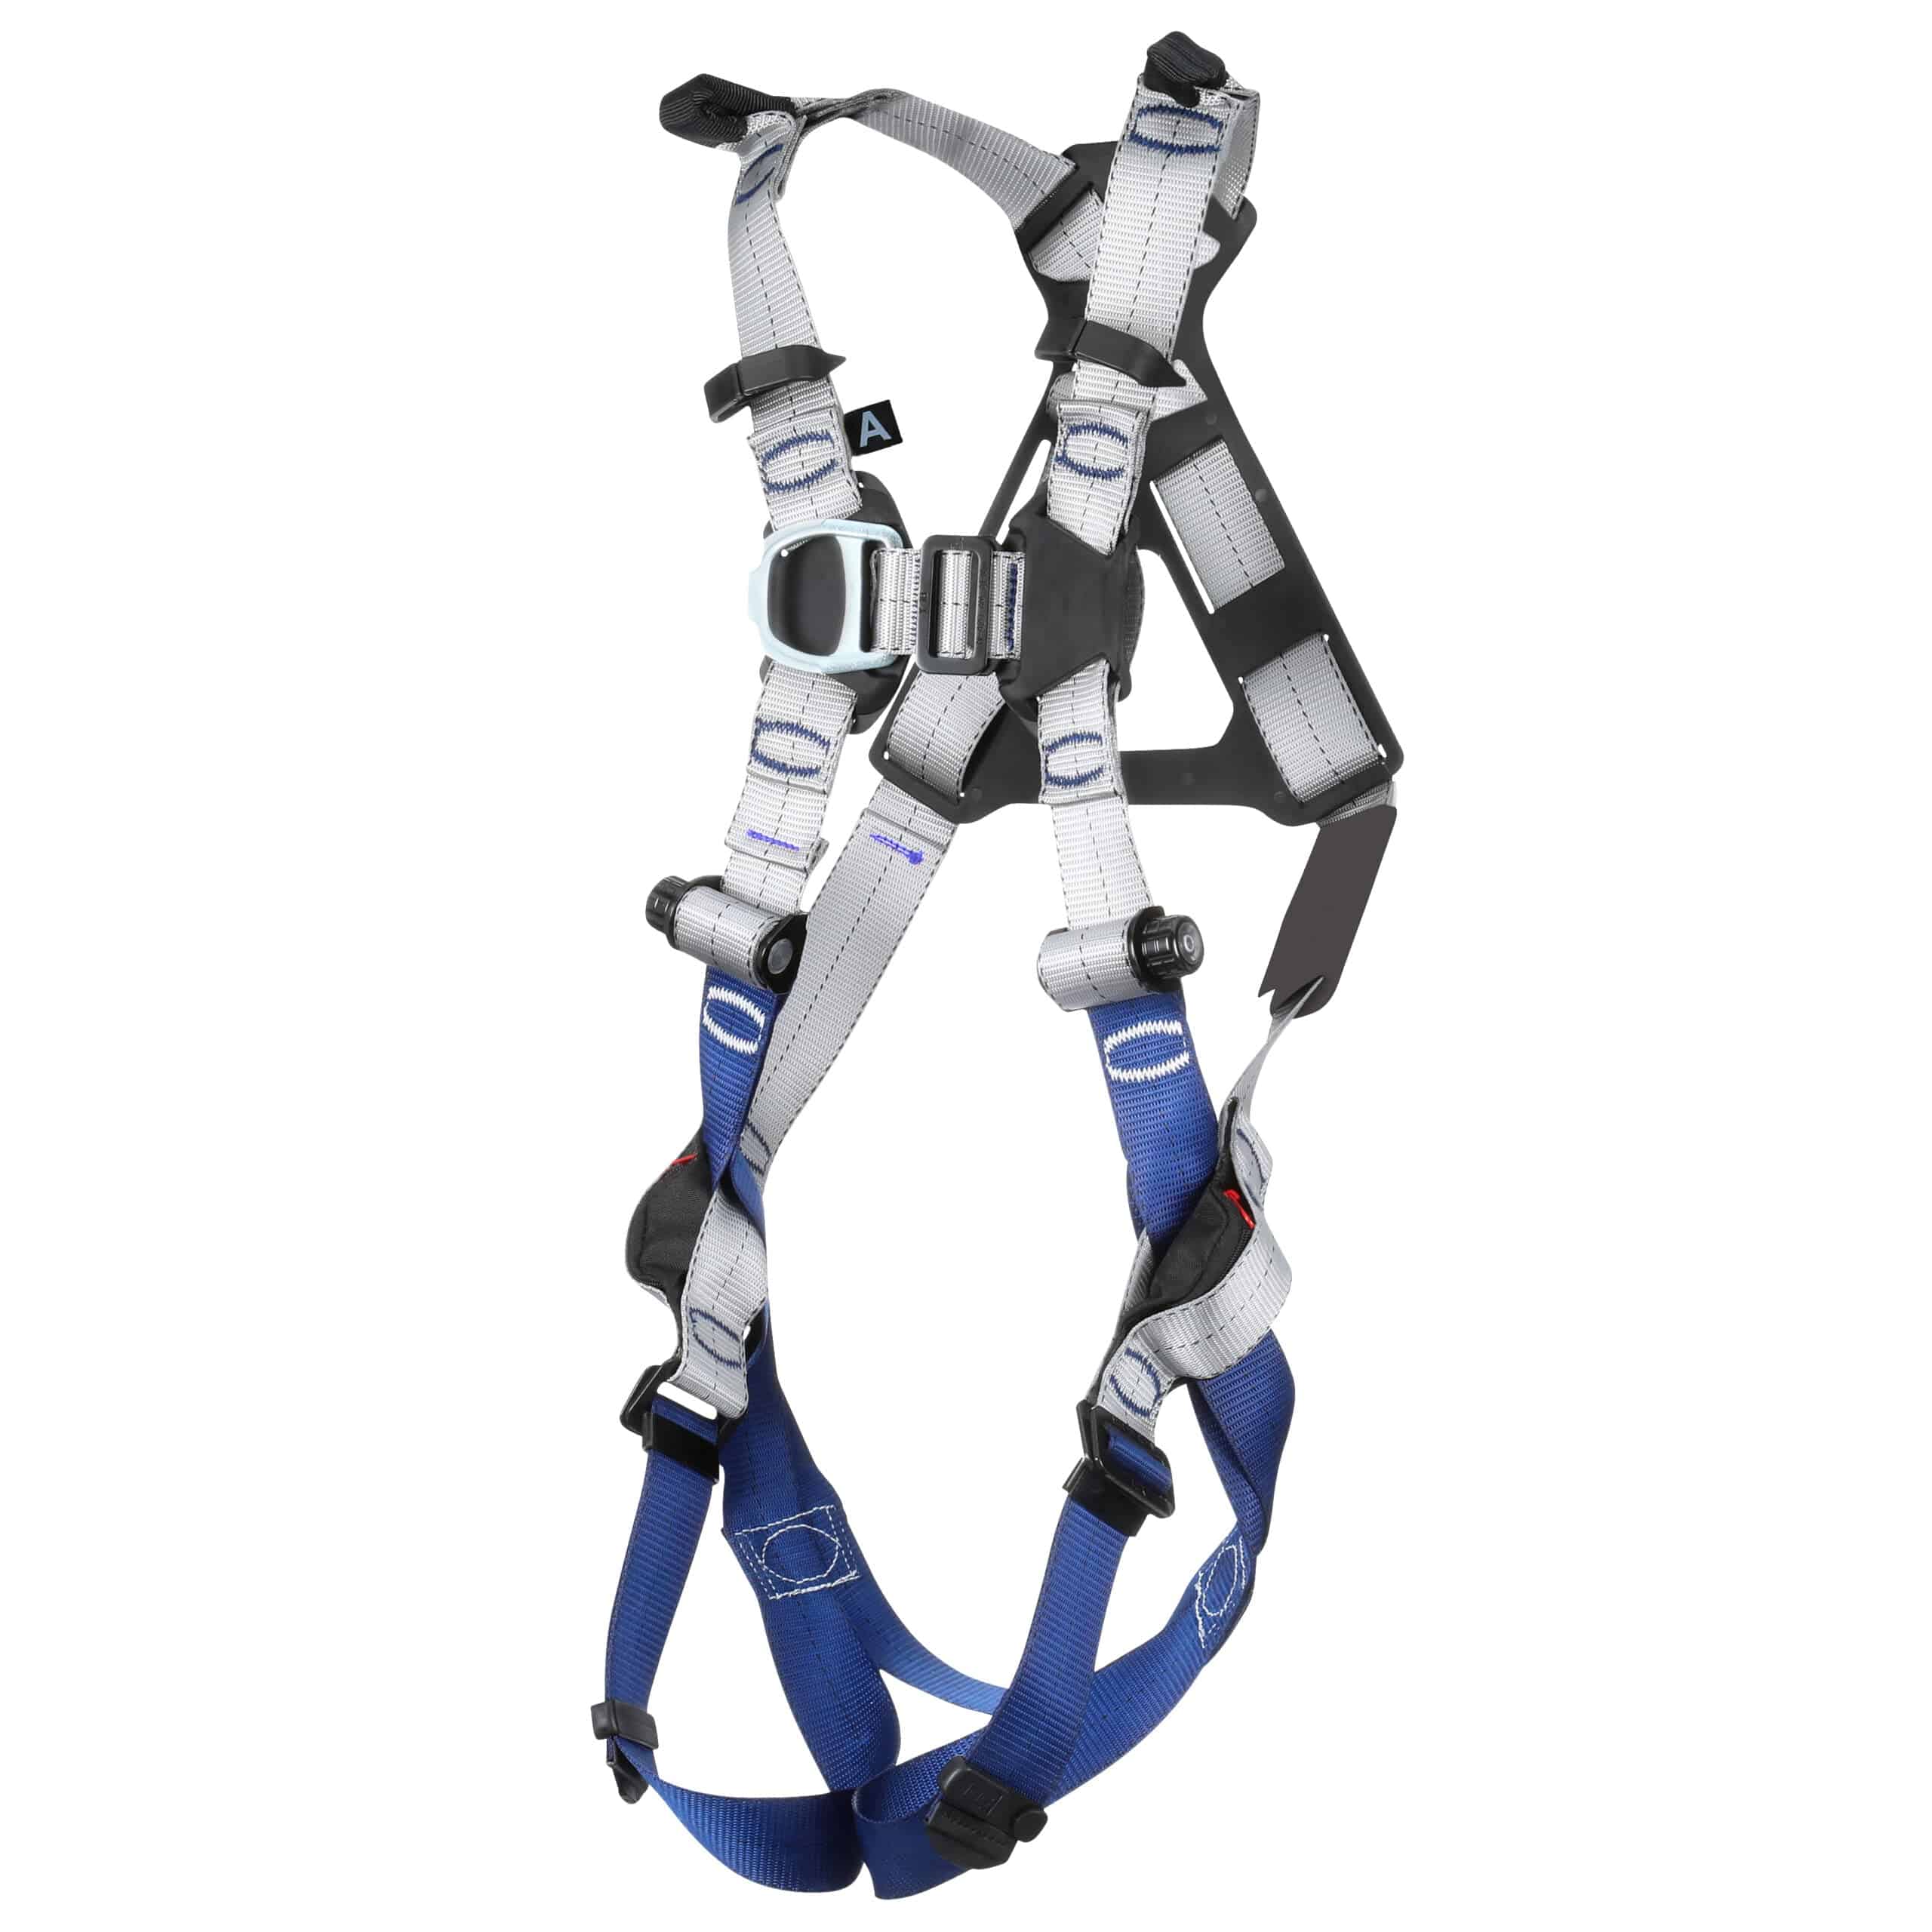 3M DBI SALA ExoFit XE50 Rescue Safety Harness - SecureHeights